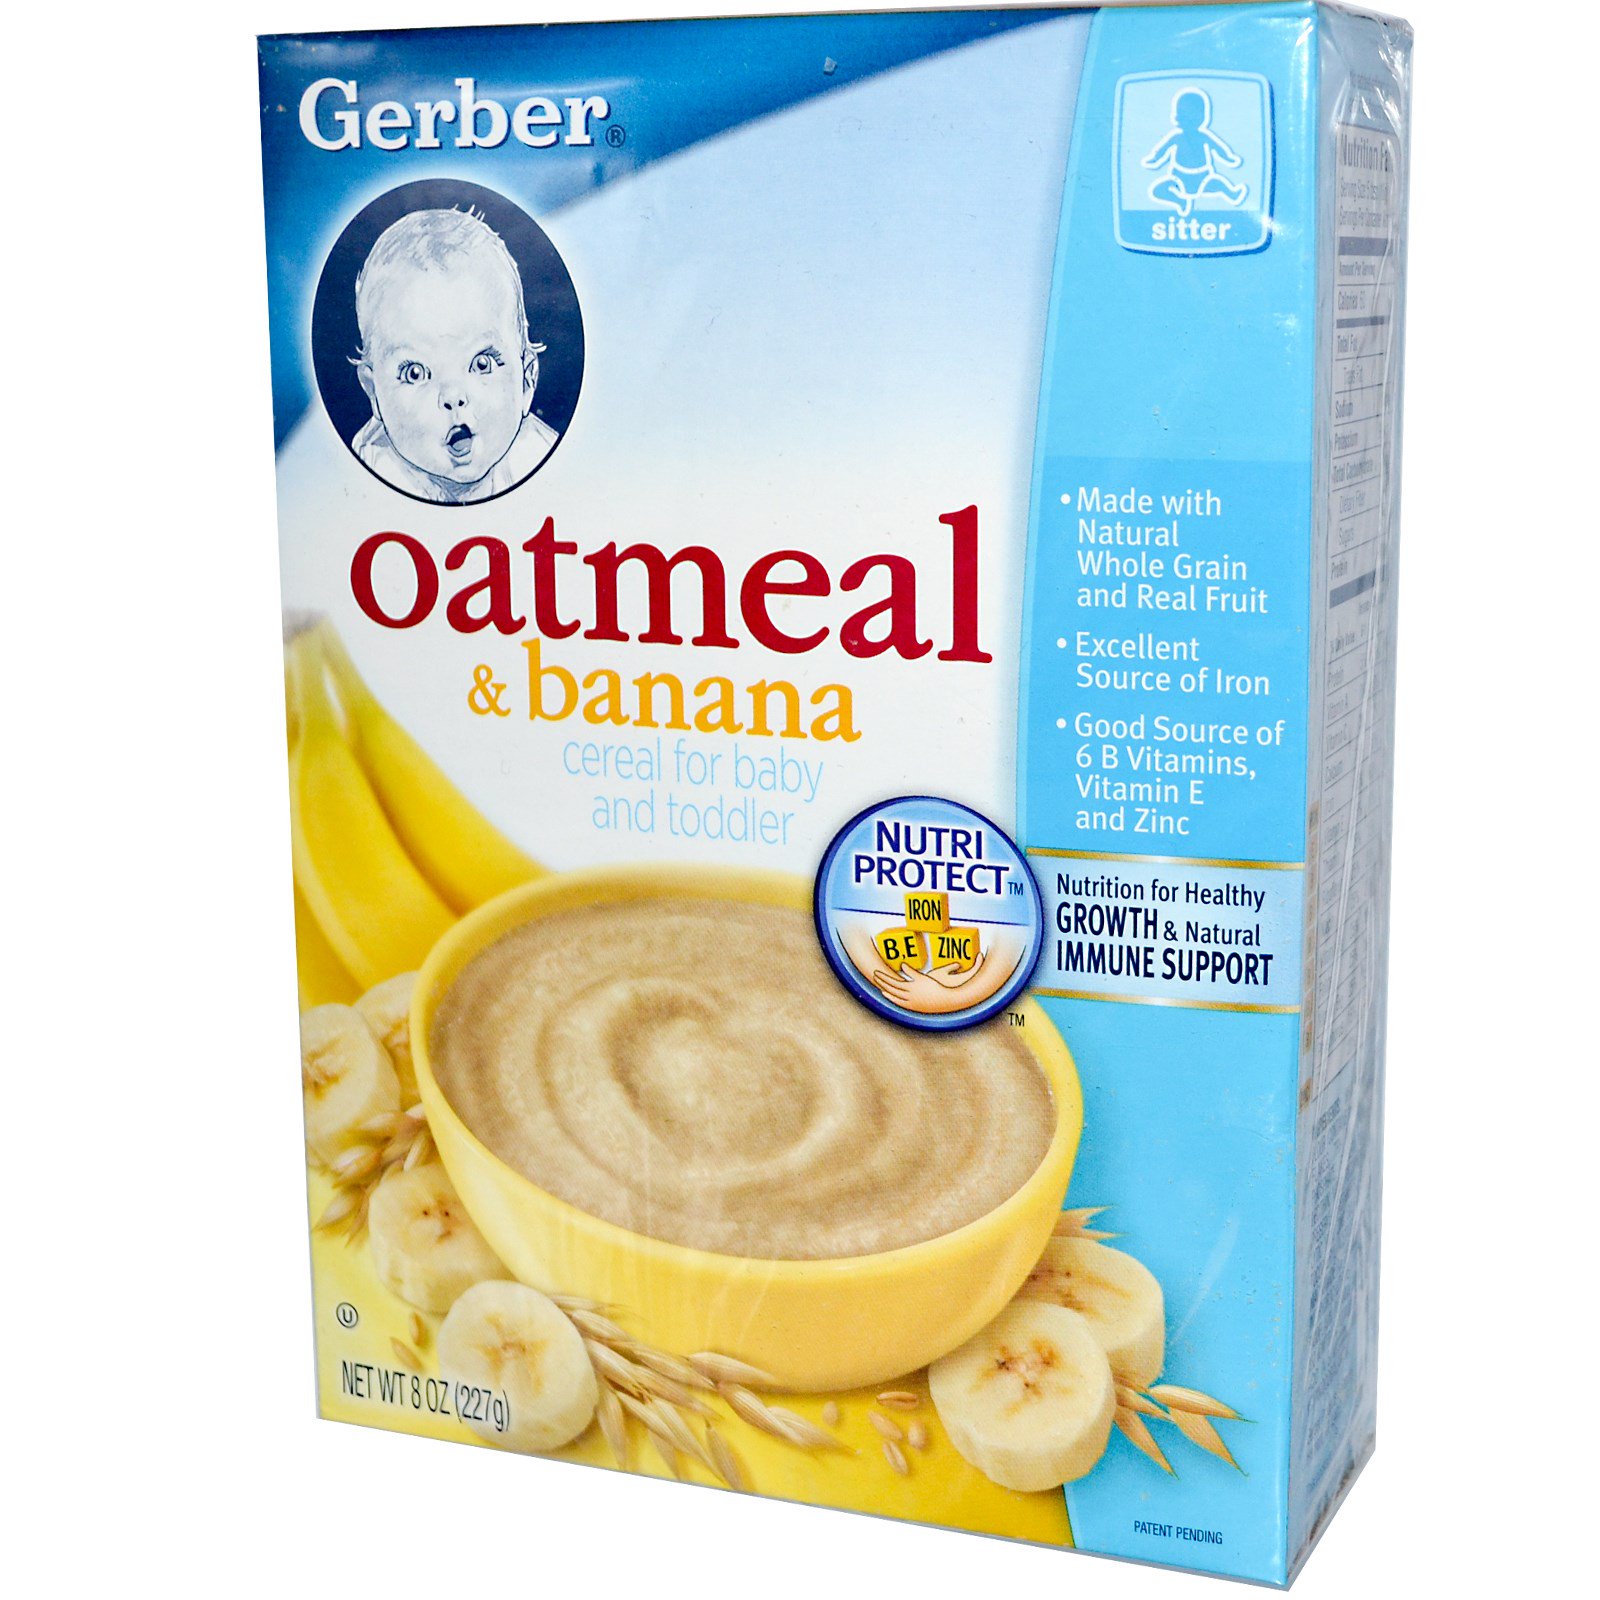 Gerber, Cereal for Baby and Toddler, Oatmeal & Banana, 8 oz (227 g) - iHerb